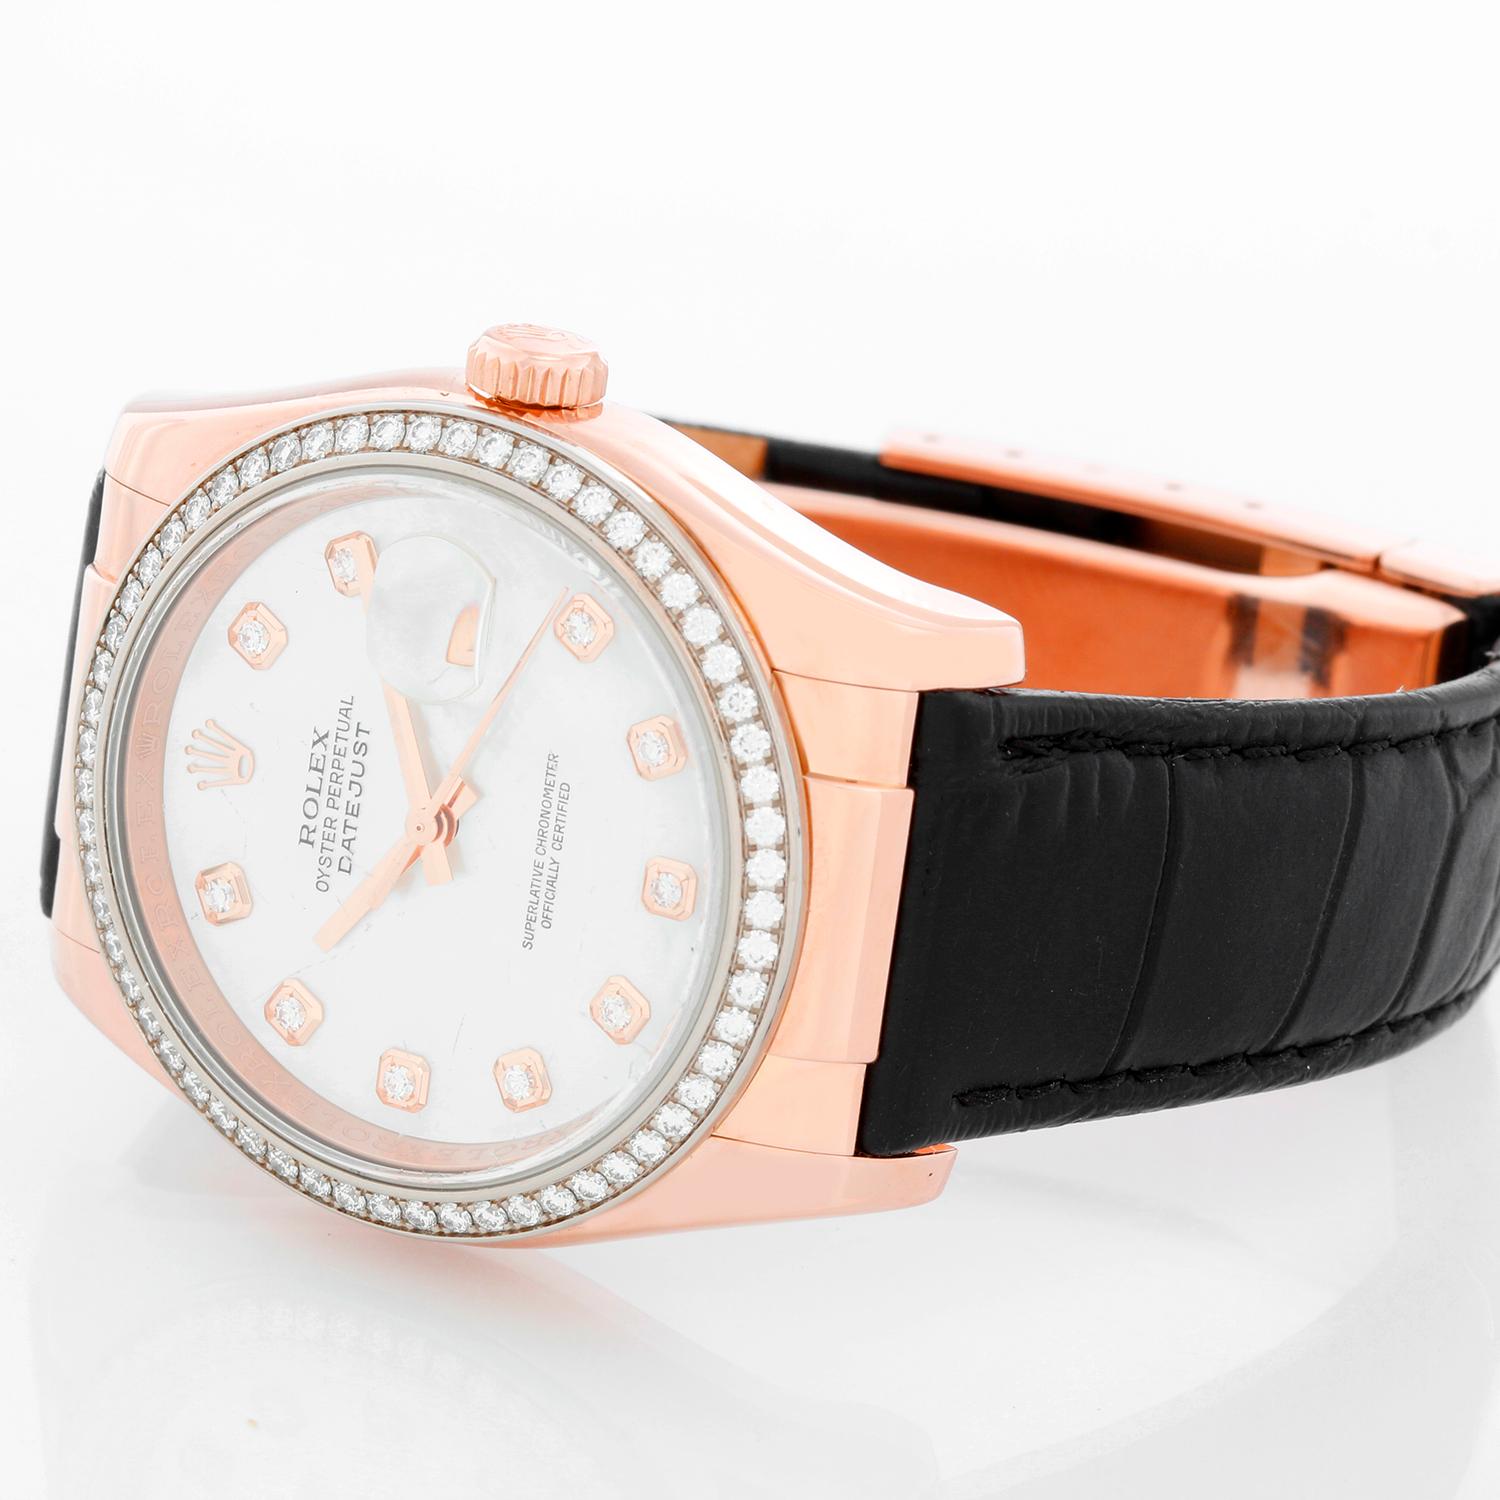 Rolex Rose Gold Datejust Mother of Pearl Watch 116185 - Automatic winding, 31 jewels, sapphire crystal. 18k rose gold case with 60-diamond bezel. Factory mother of pearl diamond dial. Leather strap band with 18k rose gold deployant clasp. Pre-owned